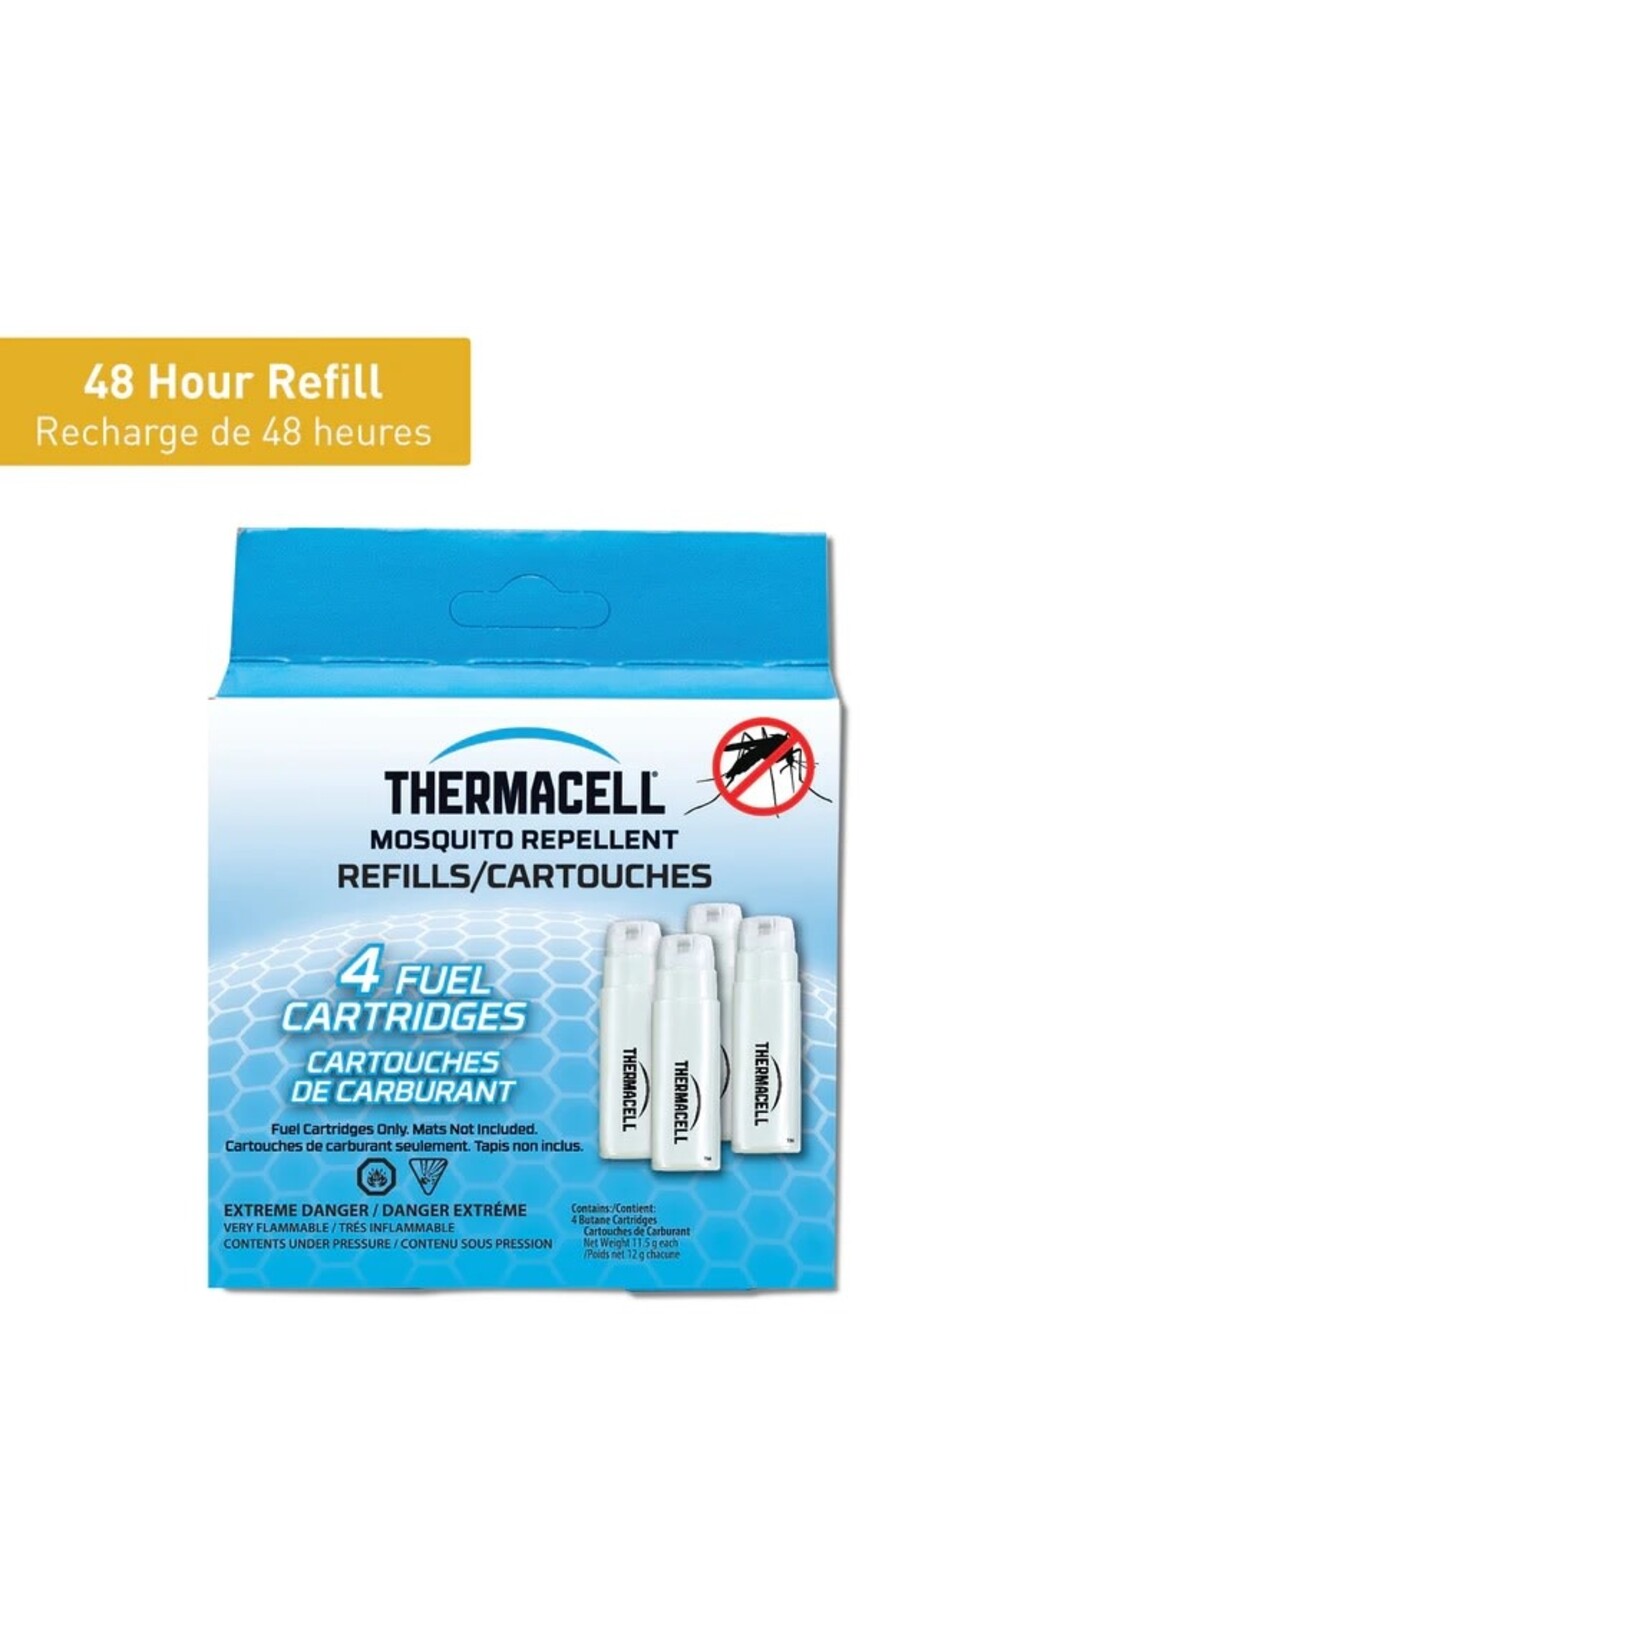 THERMACELL Recharge De Butane Thermacell 4/Pqt